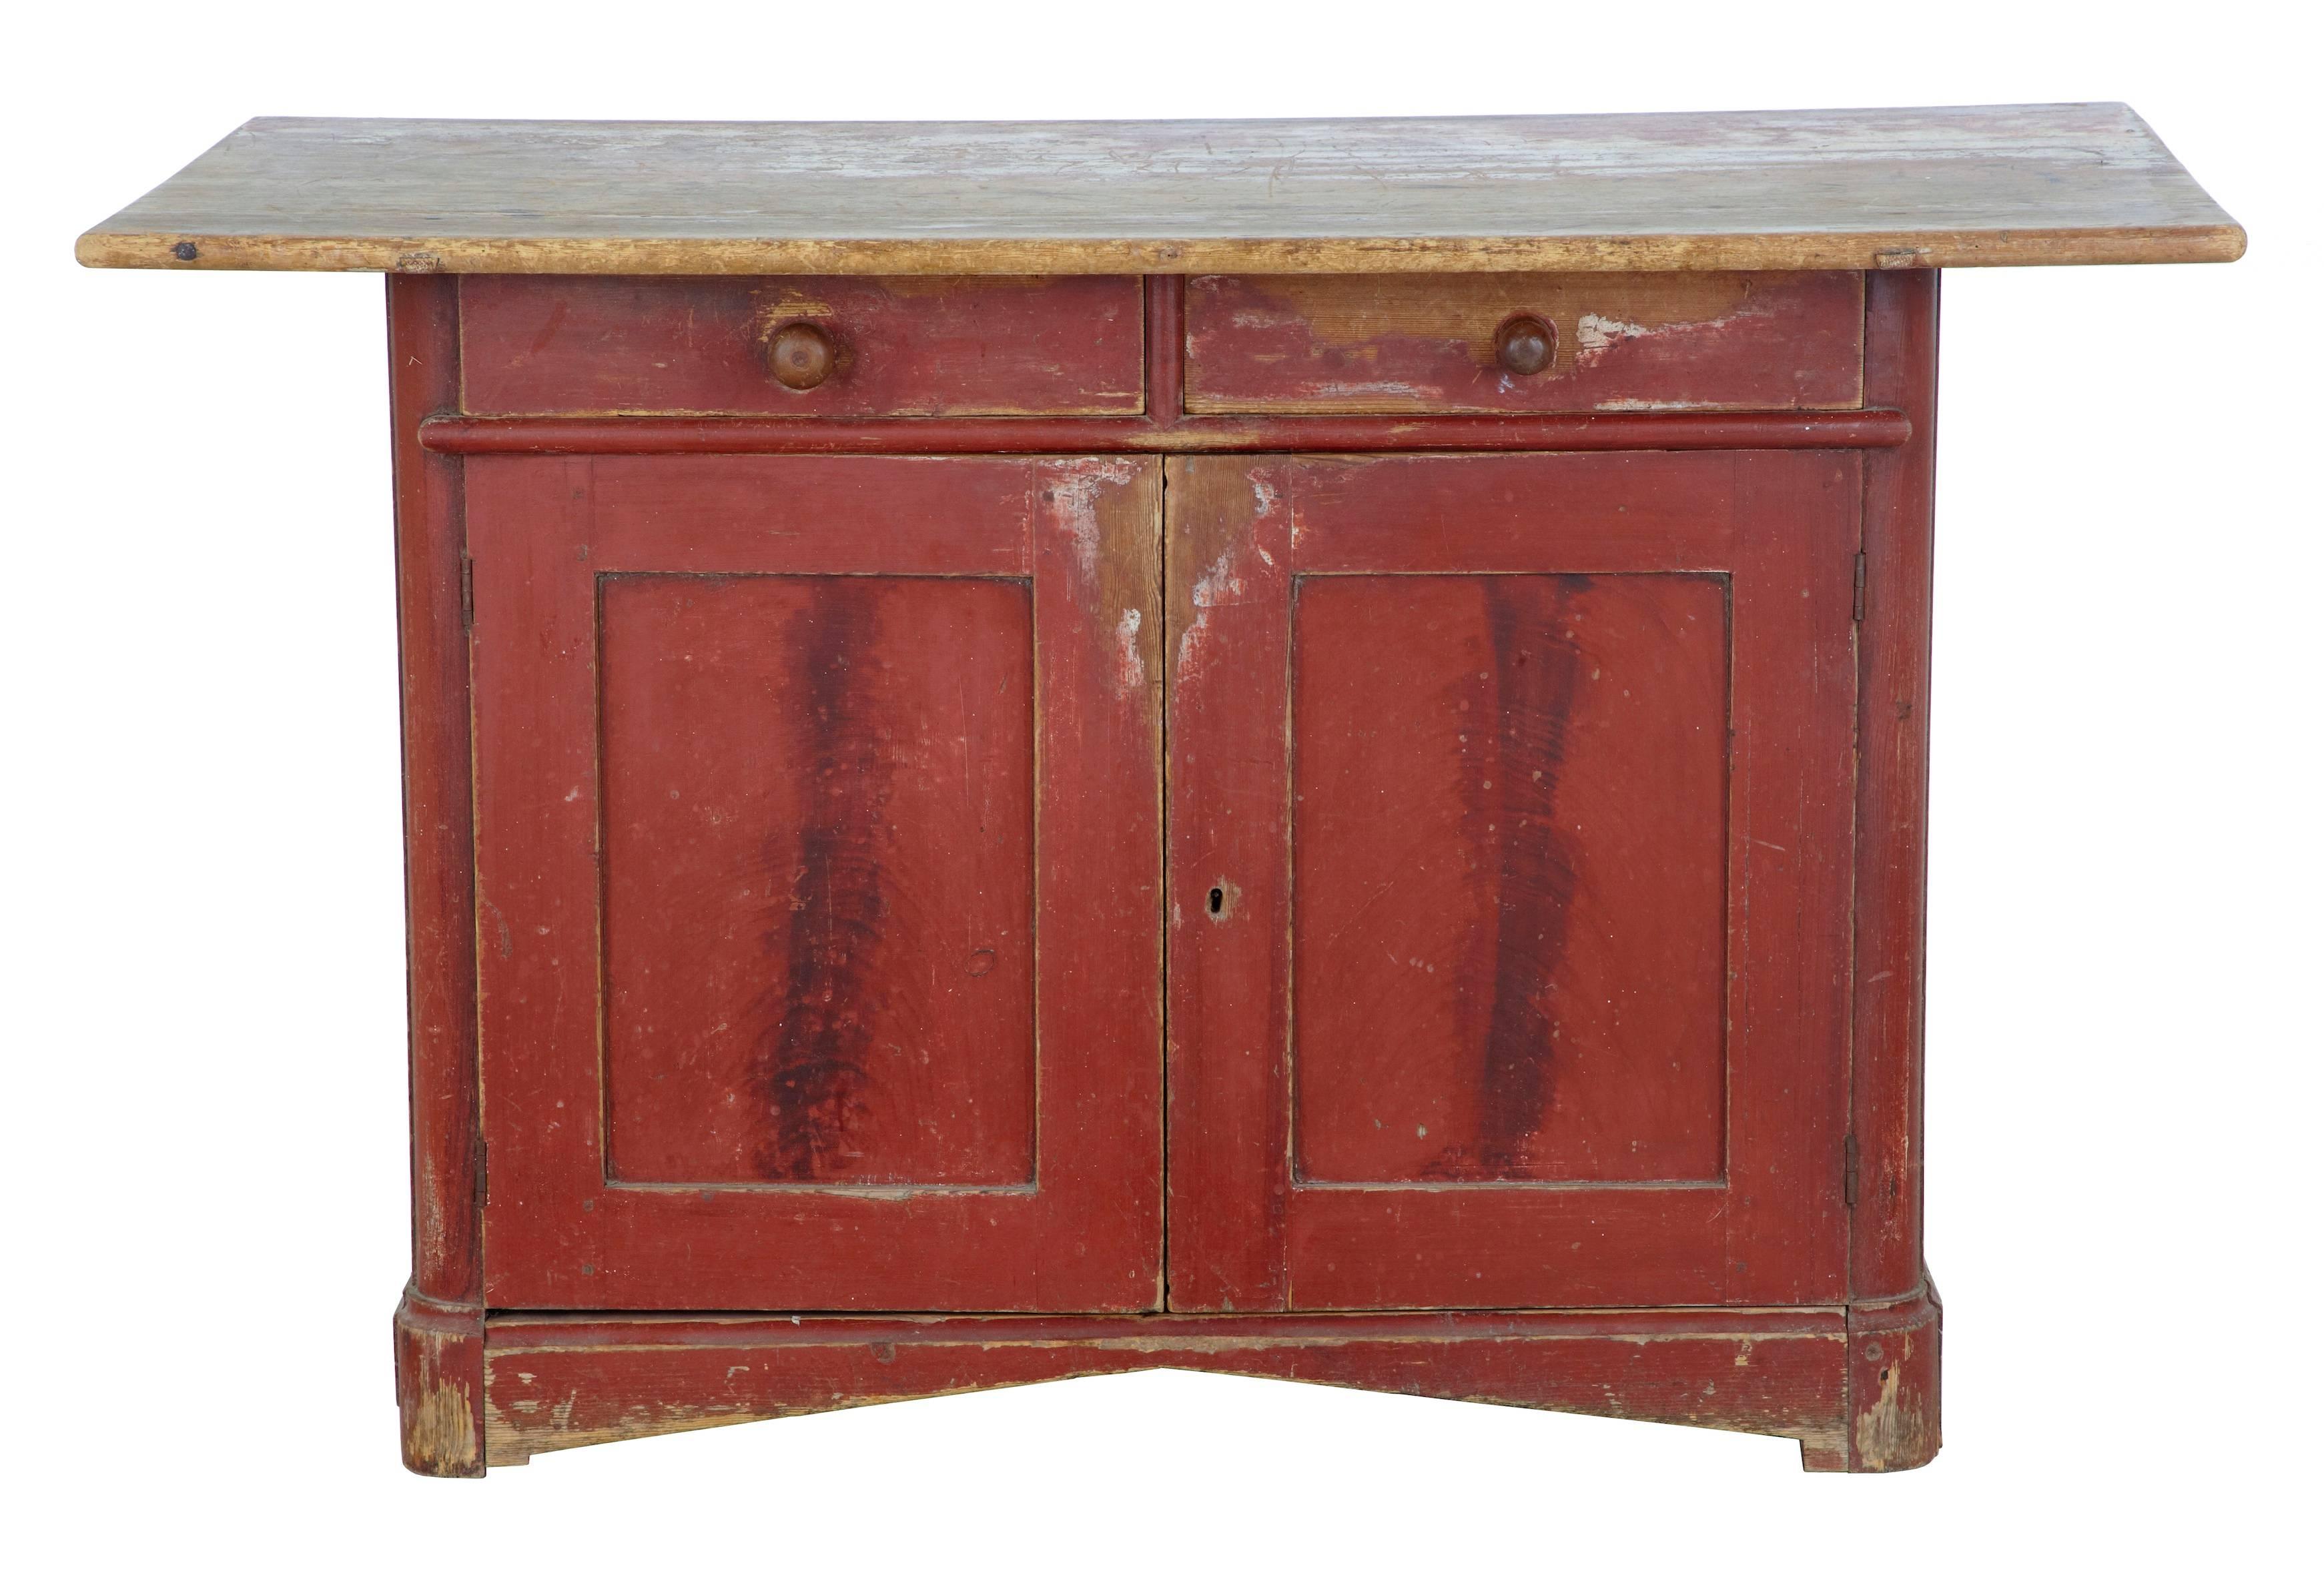 Rare rustic northern Swedish painted cupboard, circa 1870.
In its original paint, which has faded and worn giving its fantastic appearance.
Oversailing pine top, sitting above two drawers and a double door cupboard containing a single